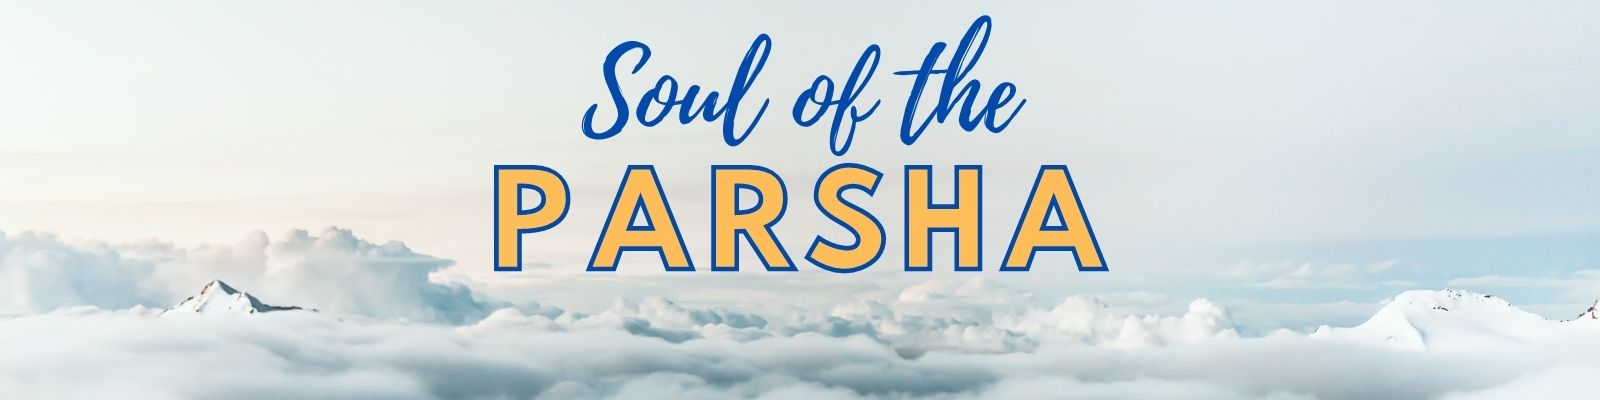 Soul of the Parsha